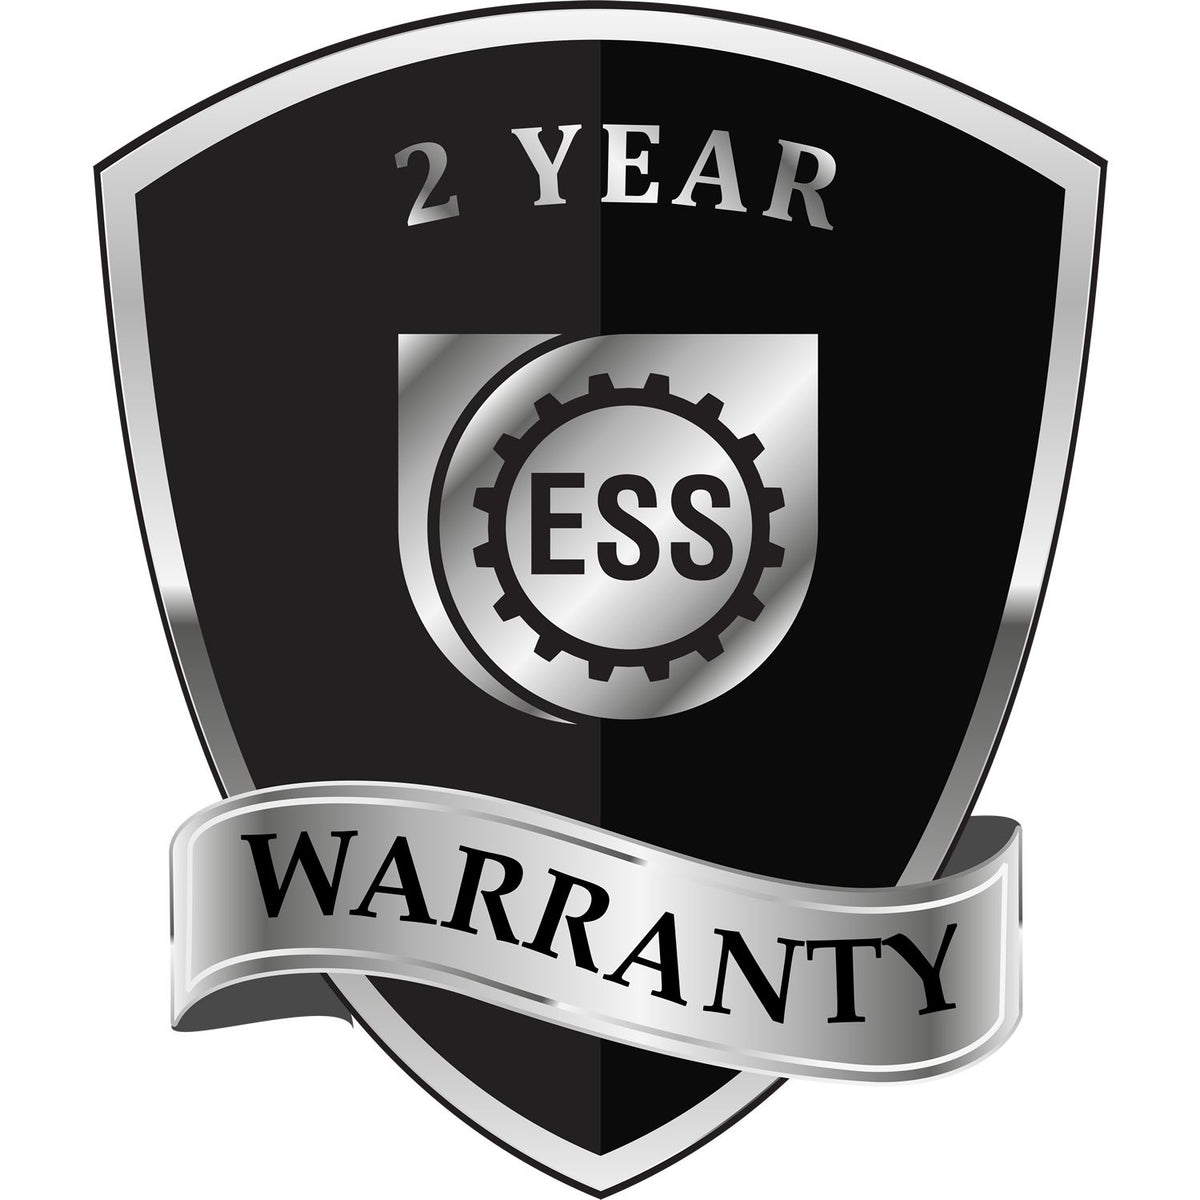 A black and silver badge or emblem showing warranty information for the Gift Minnesota Engineer Seal